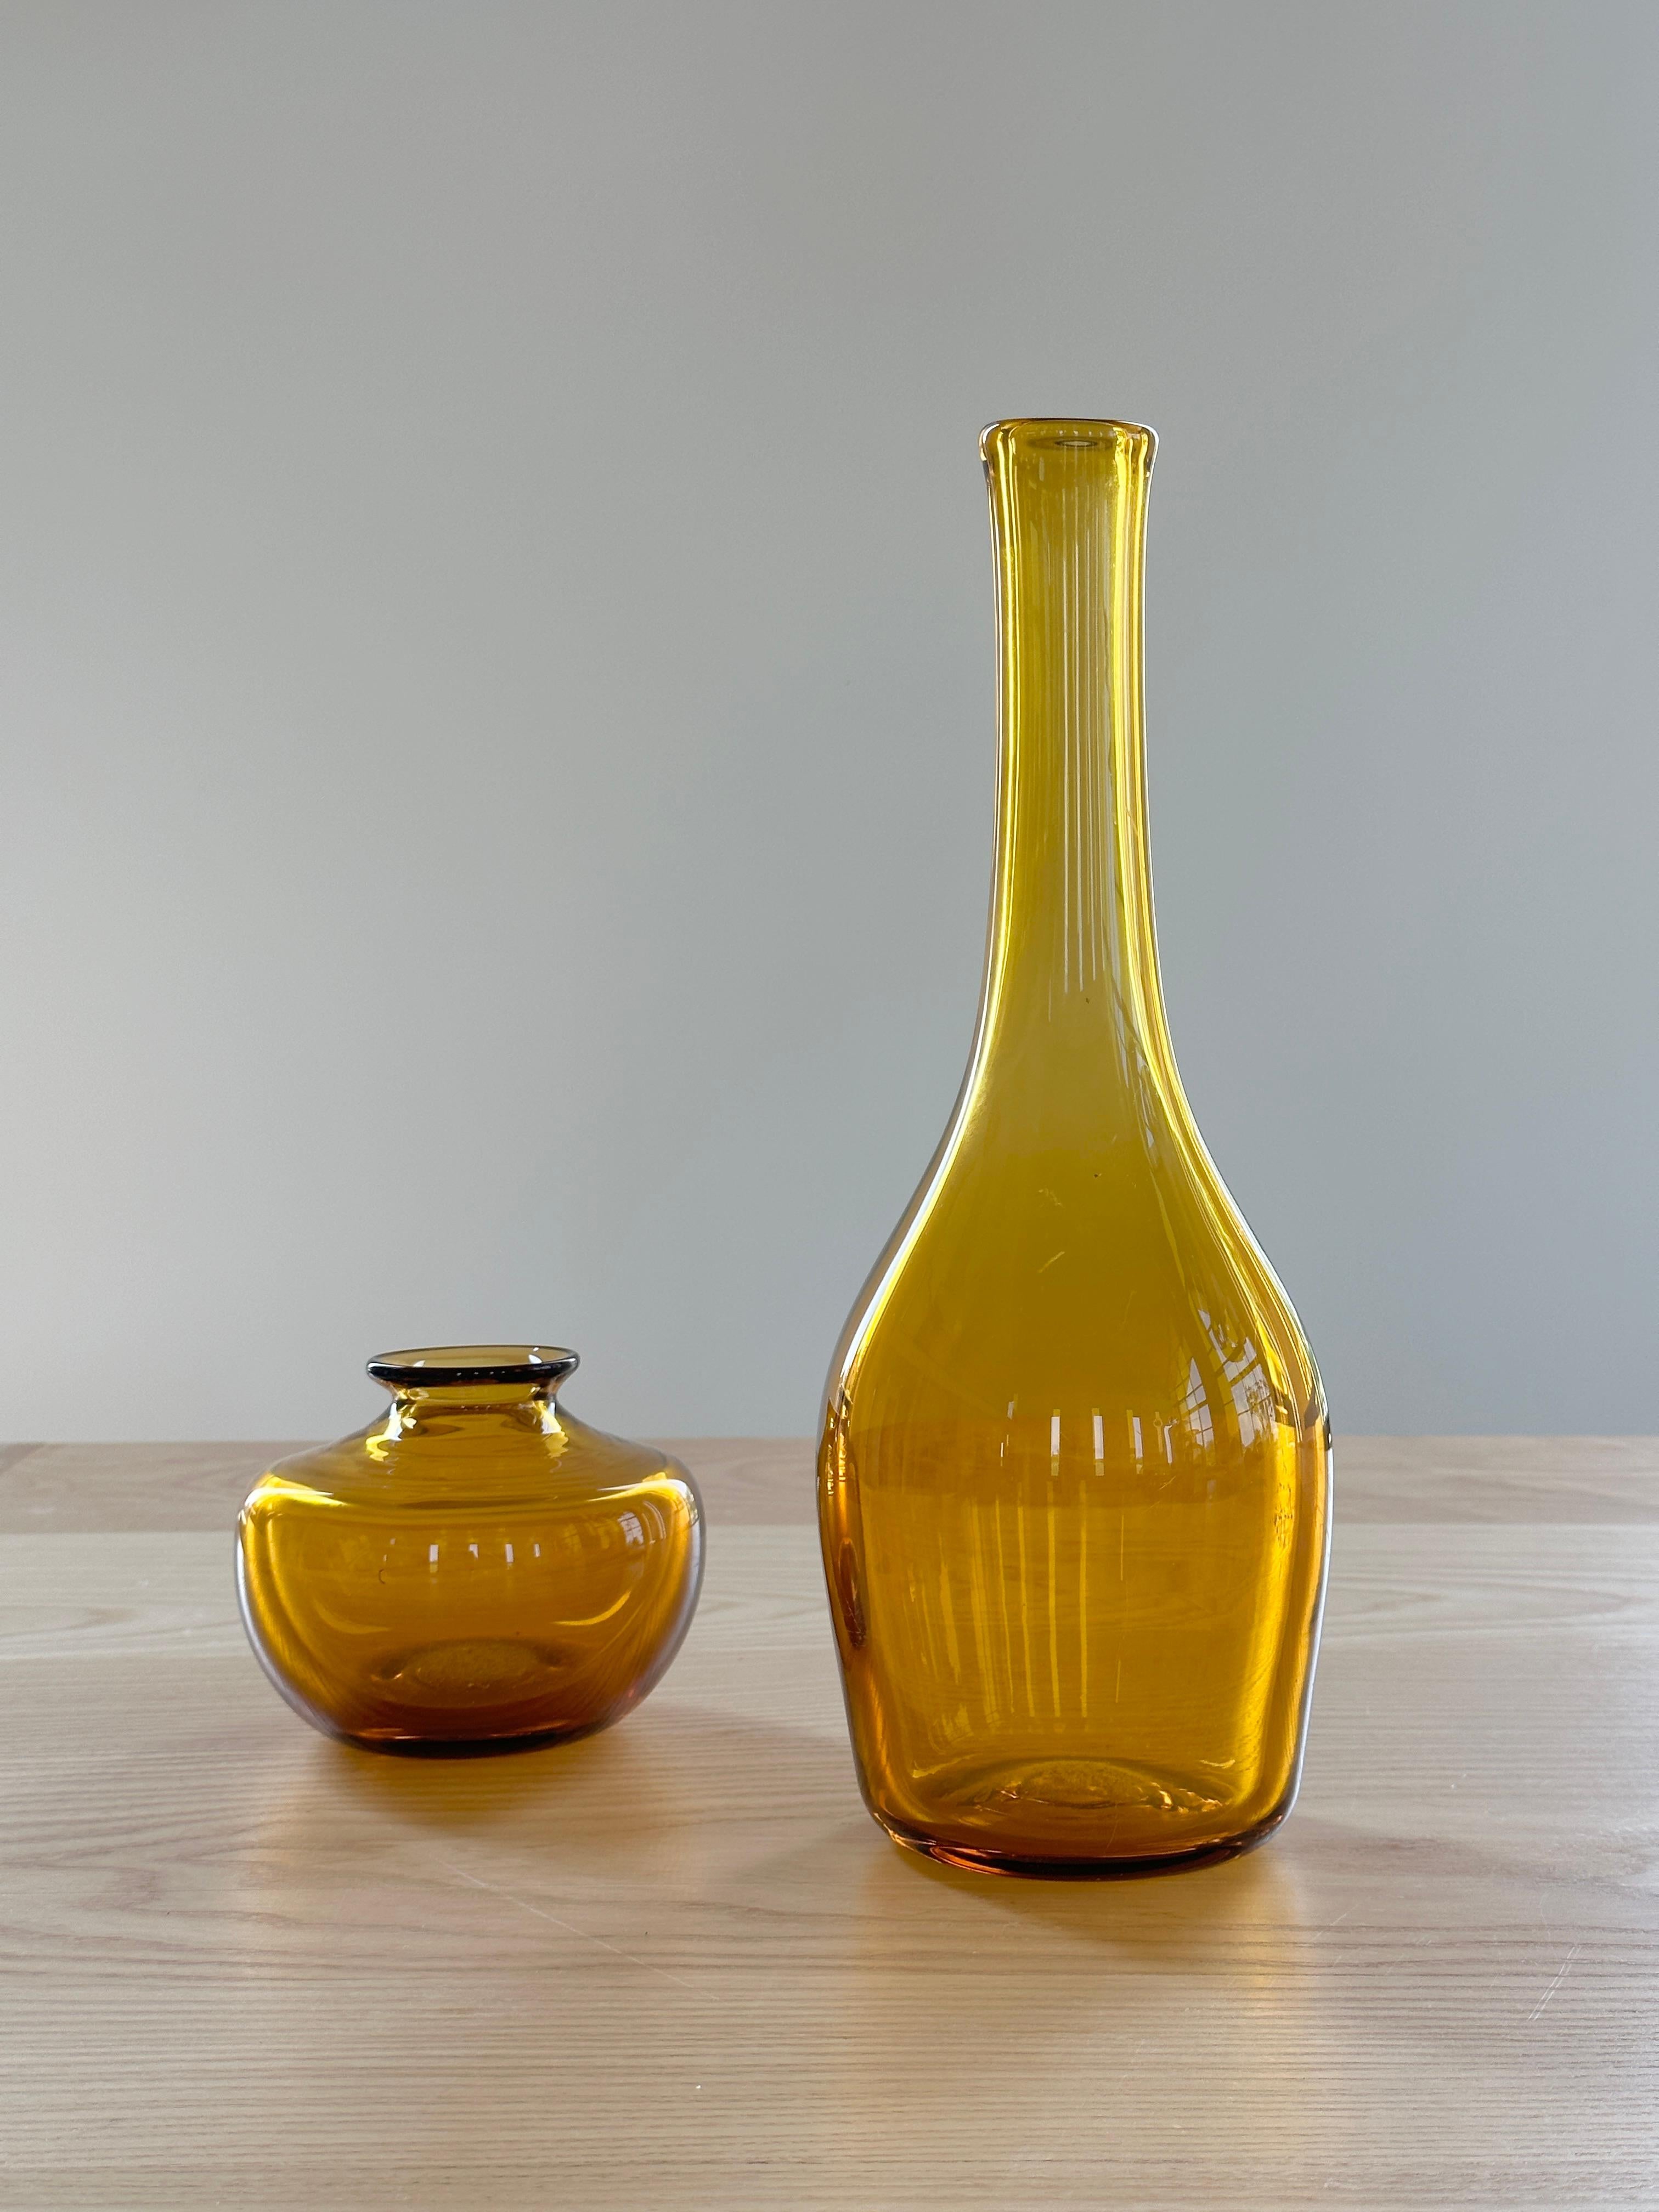 Stamped 'Verval Vallauris' thick yellow/amber French glass vases. Handblown in Vallauris, a seaside commune in France dating back to 1501 and noted for its ceramics, glass, the bitter orange tree, and Picasso, who lived there from 1948 to